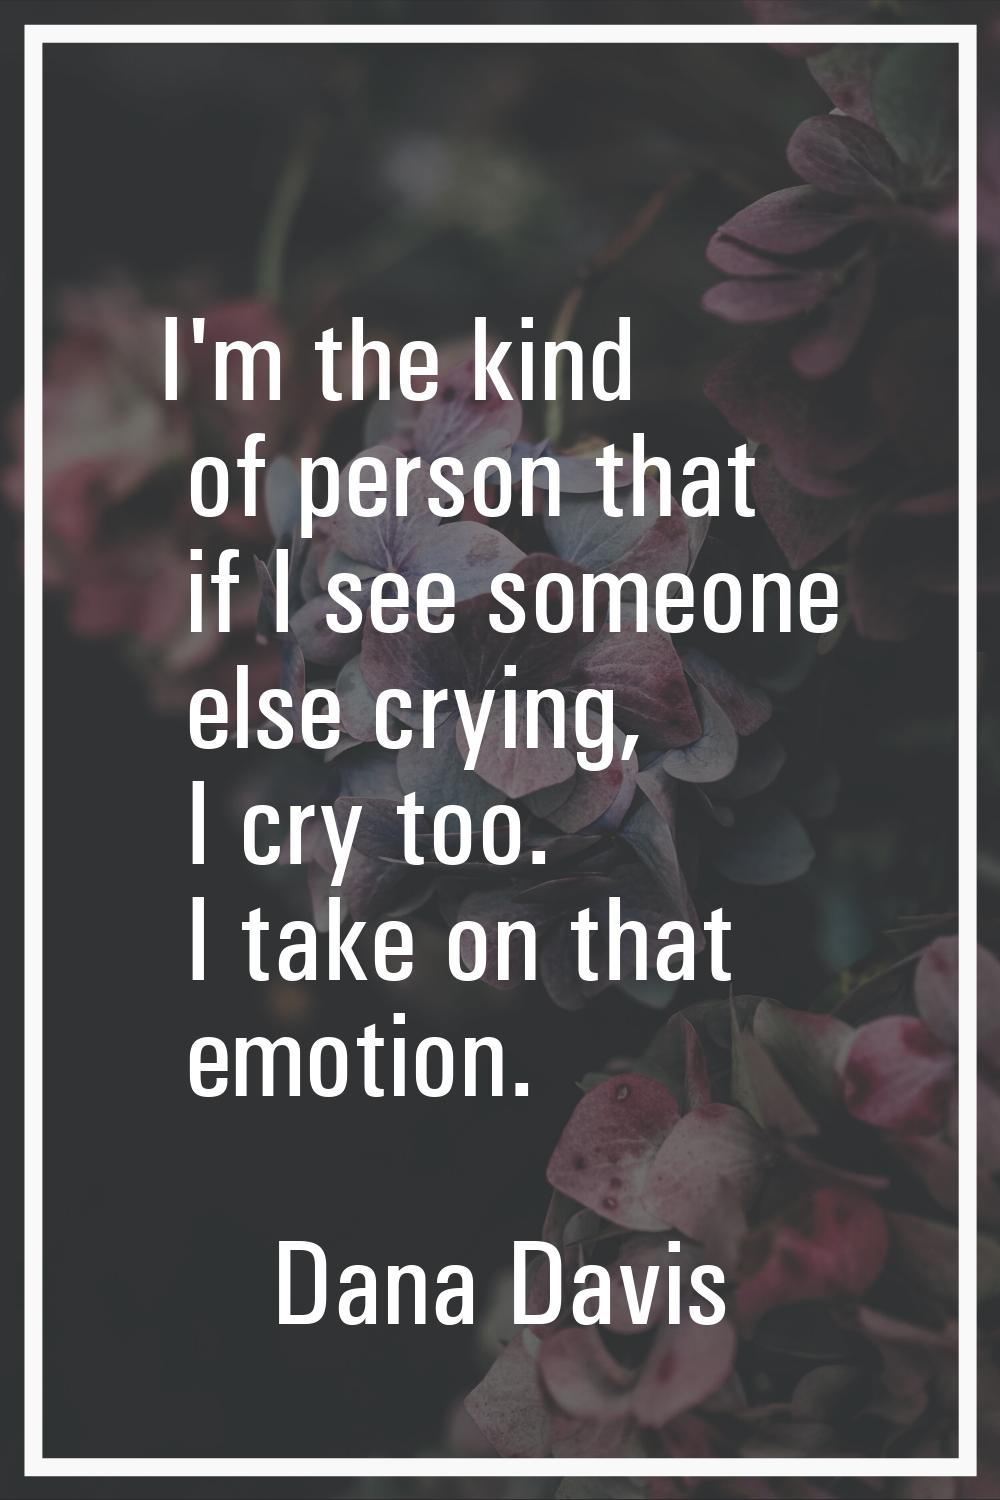 I'm the kind of person that if I see someone else crying, I cry too. I take on that emotion.